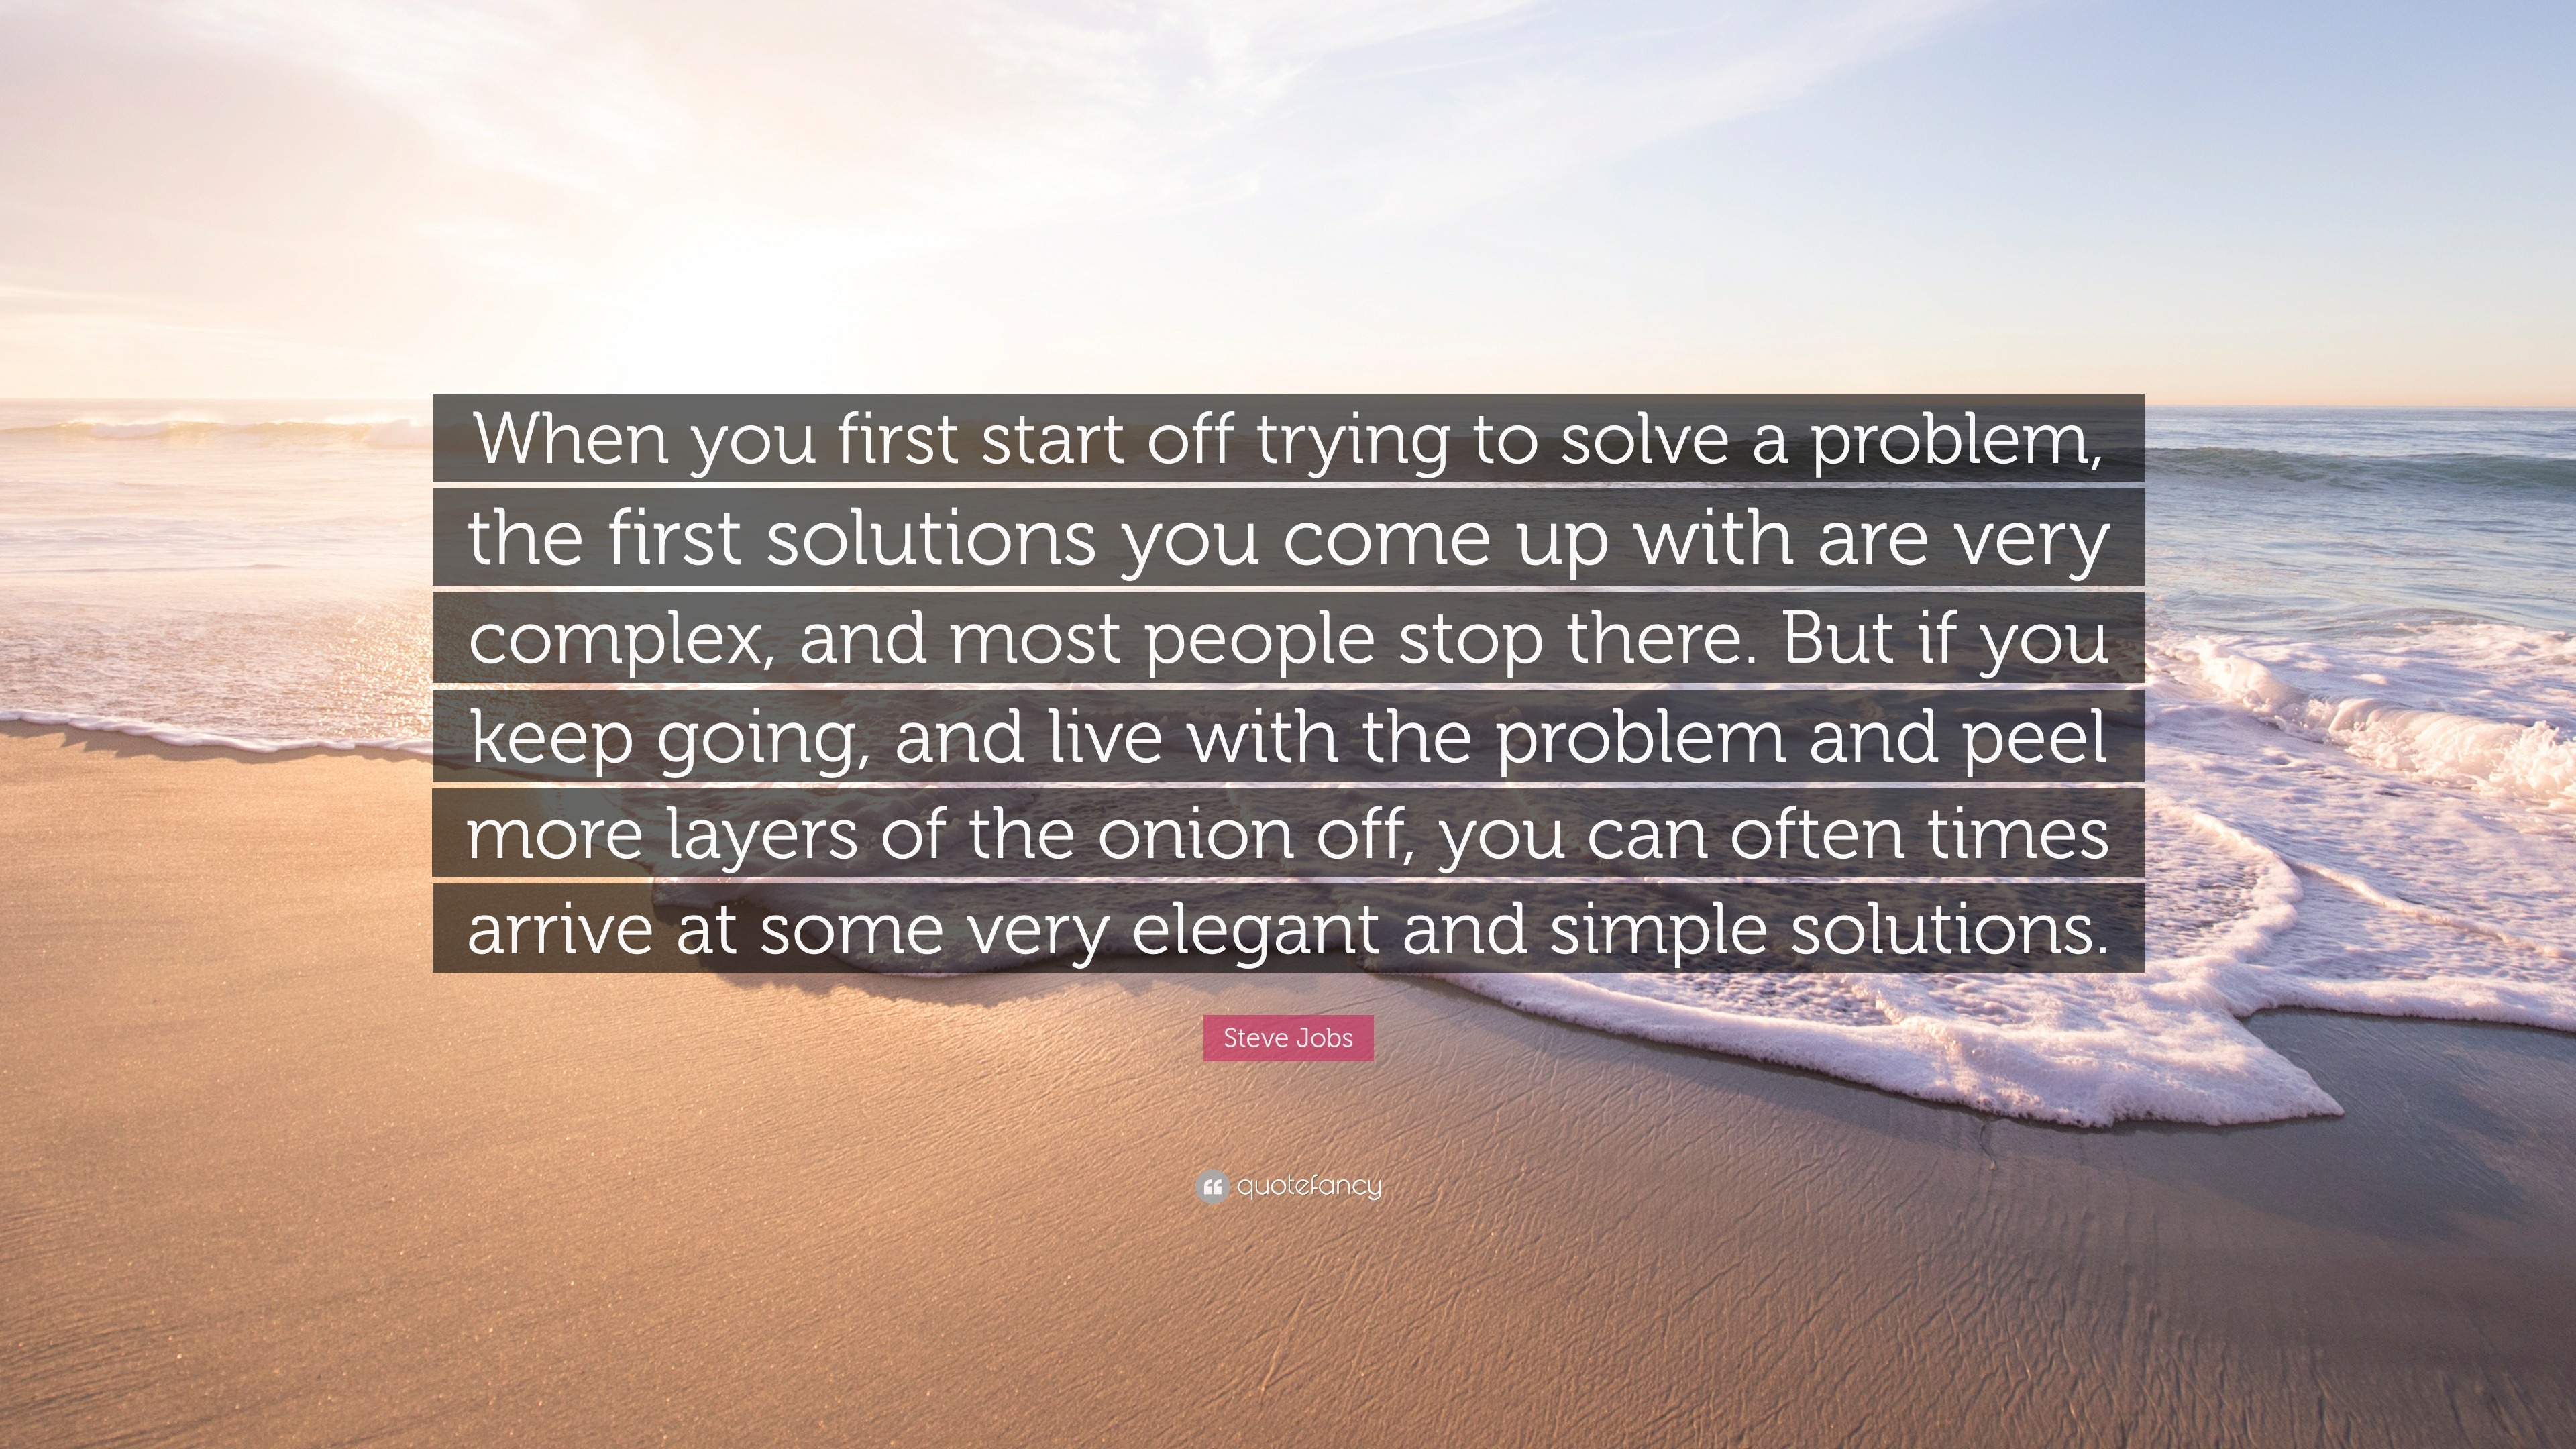 Steve Jobs Quote “When you first start off trying to solve a problem